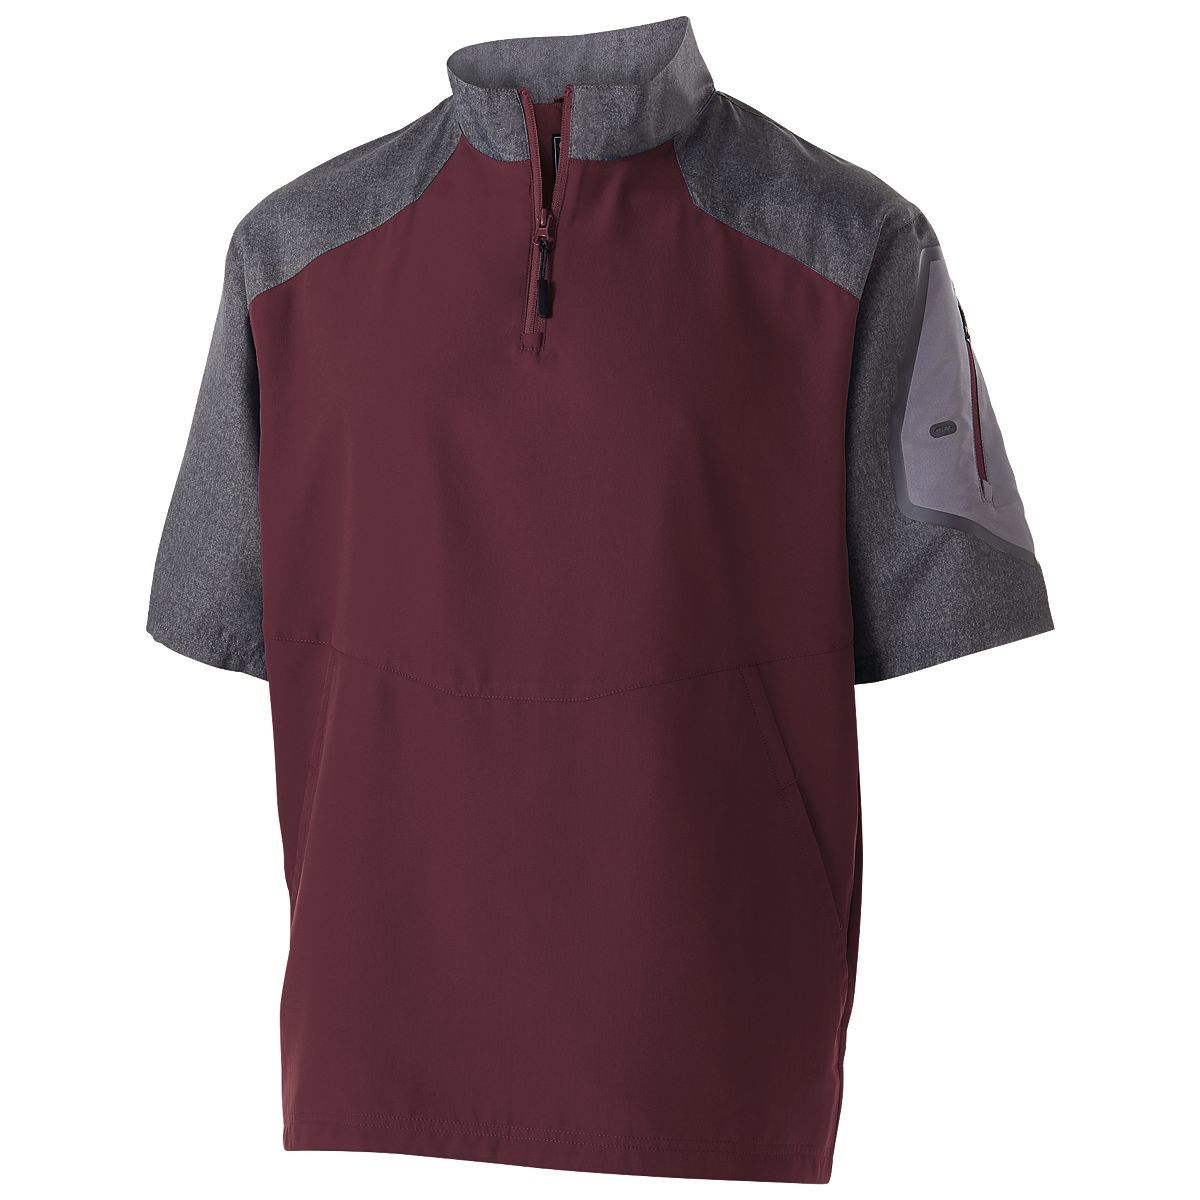 Holloway Raider  Short Sleeve Pullover in Carbon Print/Maroon  -Part of the Adult, Adult-Pullover, Holloway, Outerwear product lines at KanaleyCreations.com